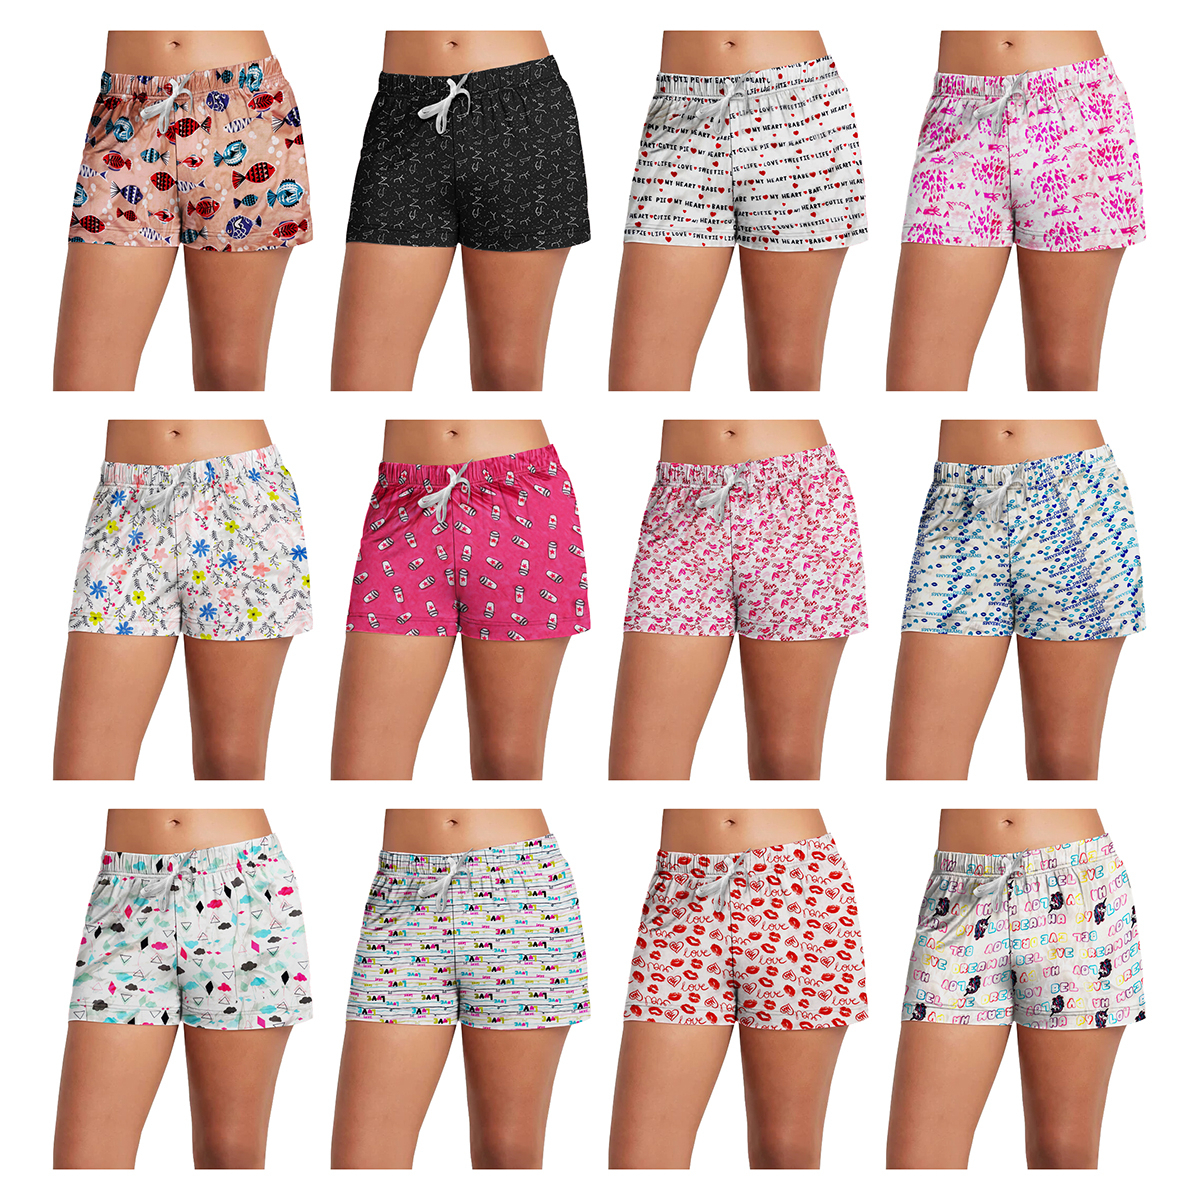 3-Pack : Women's Comfy Lounge Bottom Pajama Shorts W/Drawstring - Assorted Styles, Small